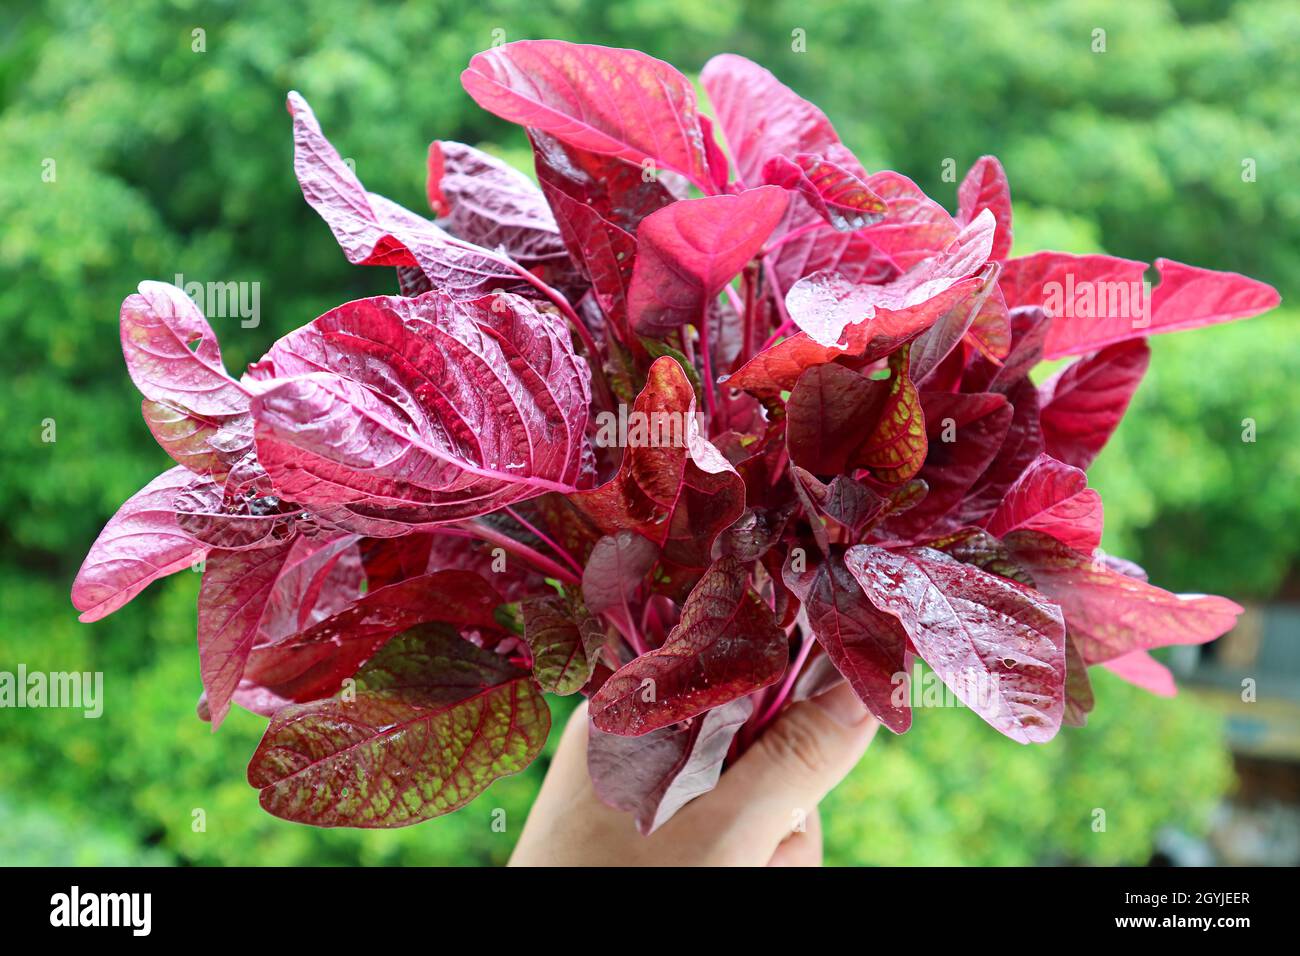 Bunch of Vibrant Color Fresh Red Spinach or in Hand Against Blurry Green Foliage Stock Photo